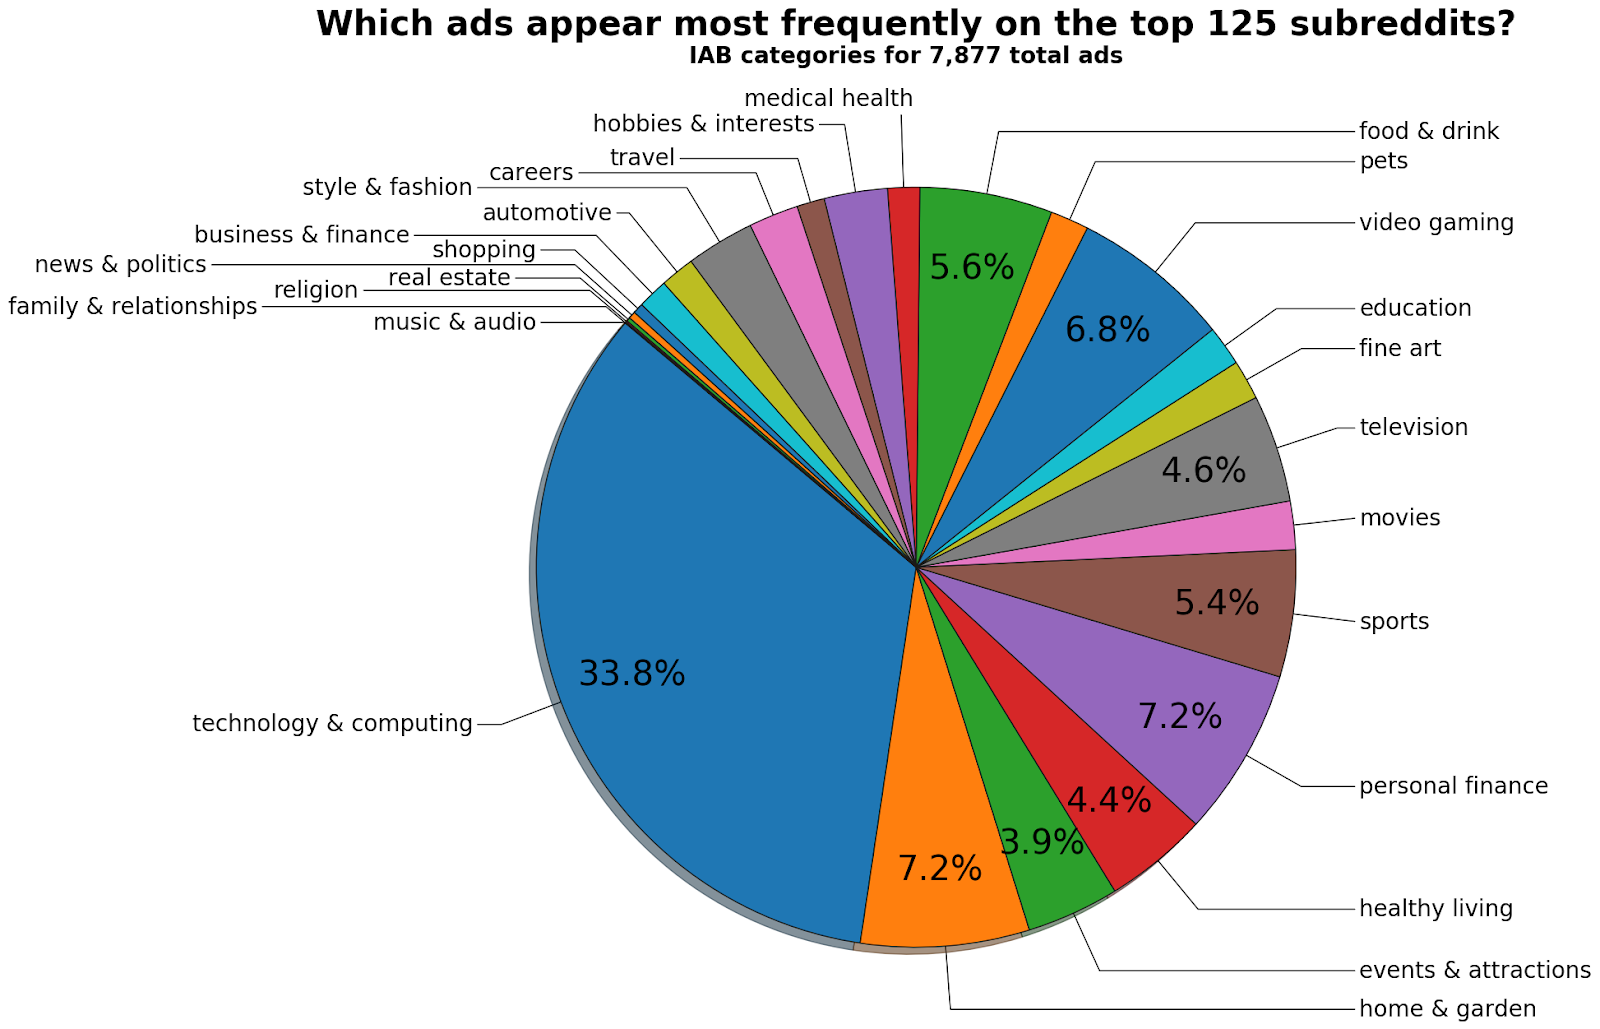 IAB categories for 7,871 ads seen across the 125 top SFW subreddits (by subcriber numbers)